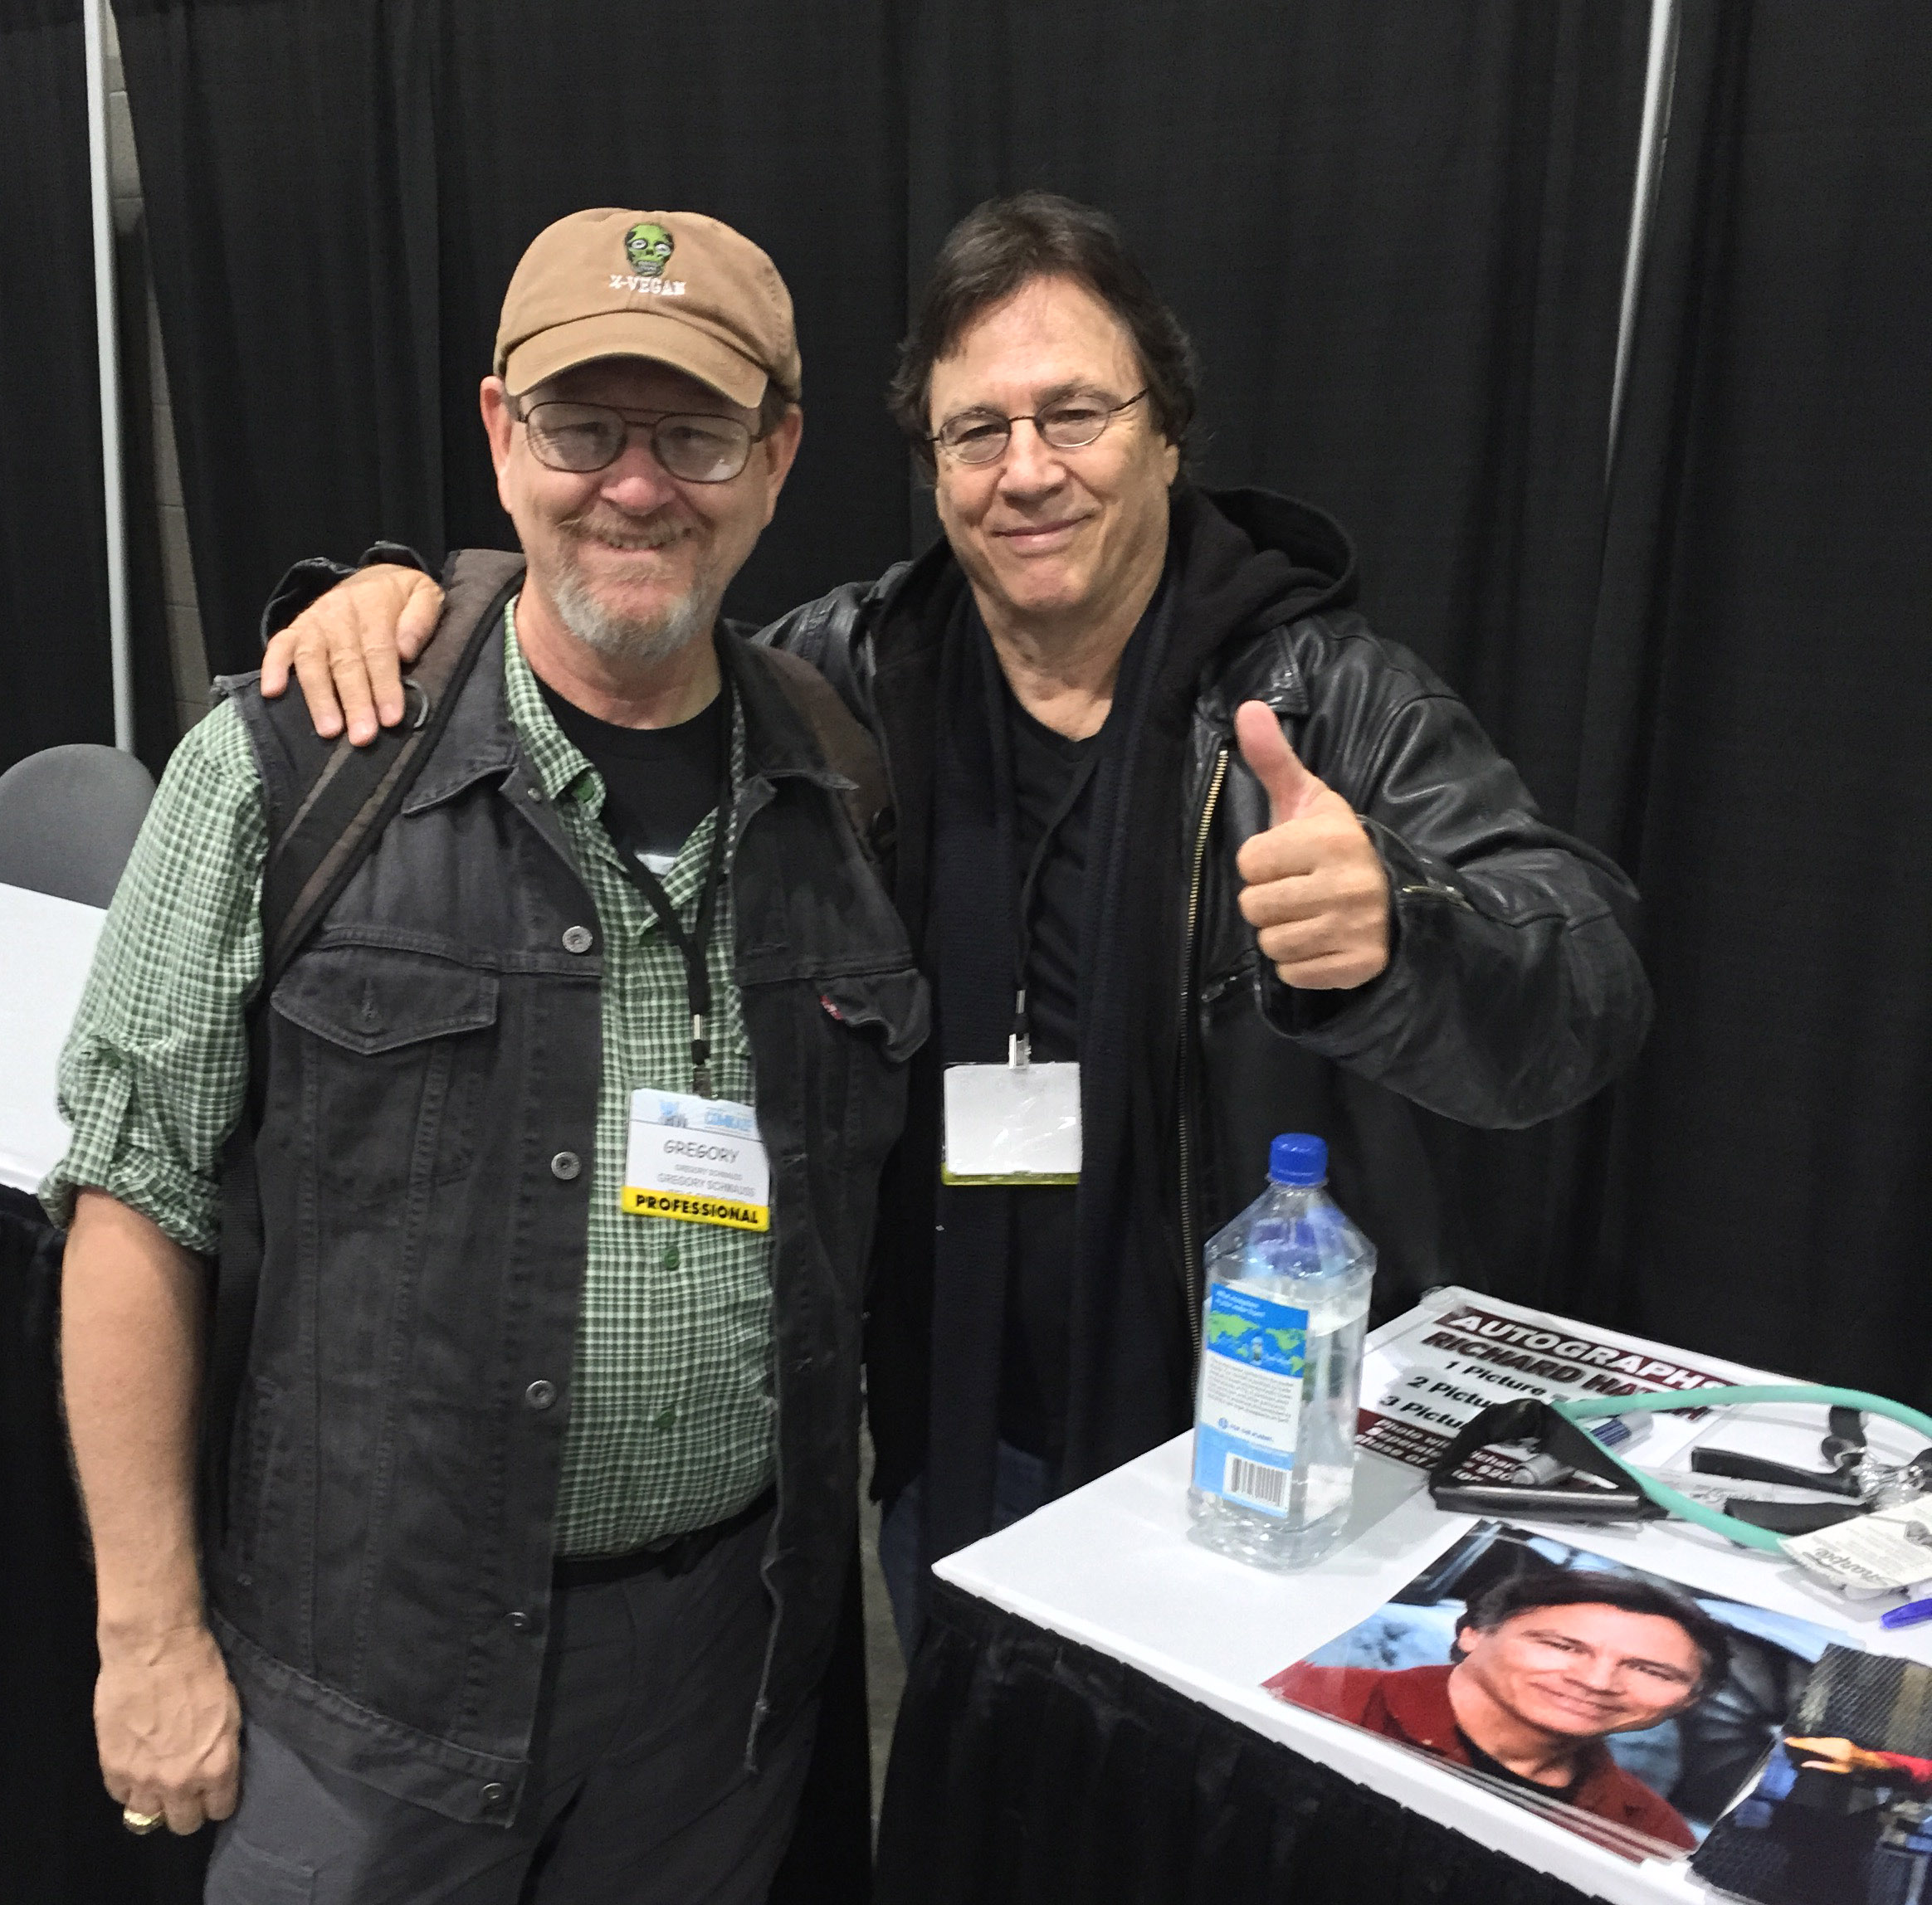 I'm pictured with Richard Hatch at the 2014 Stan Lee Comikaze Convention.